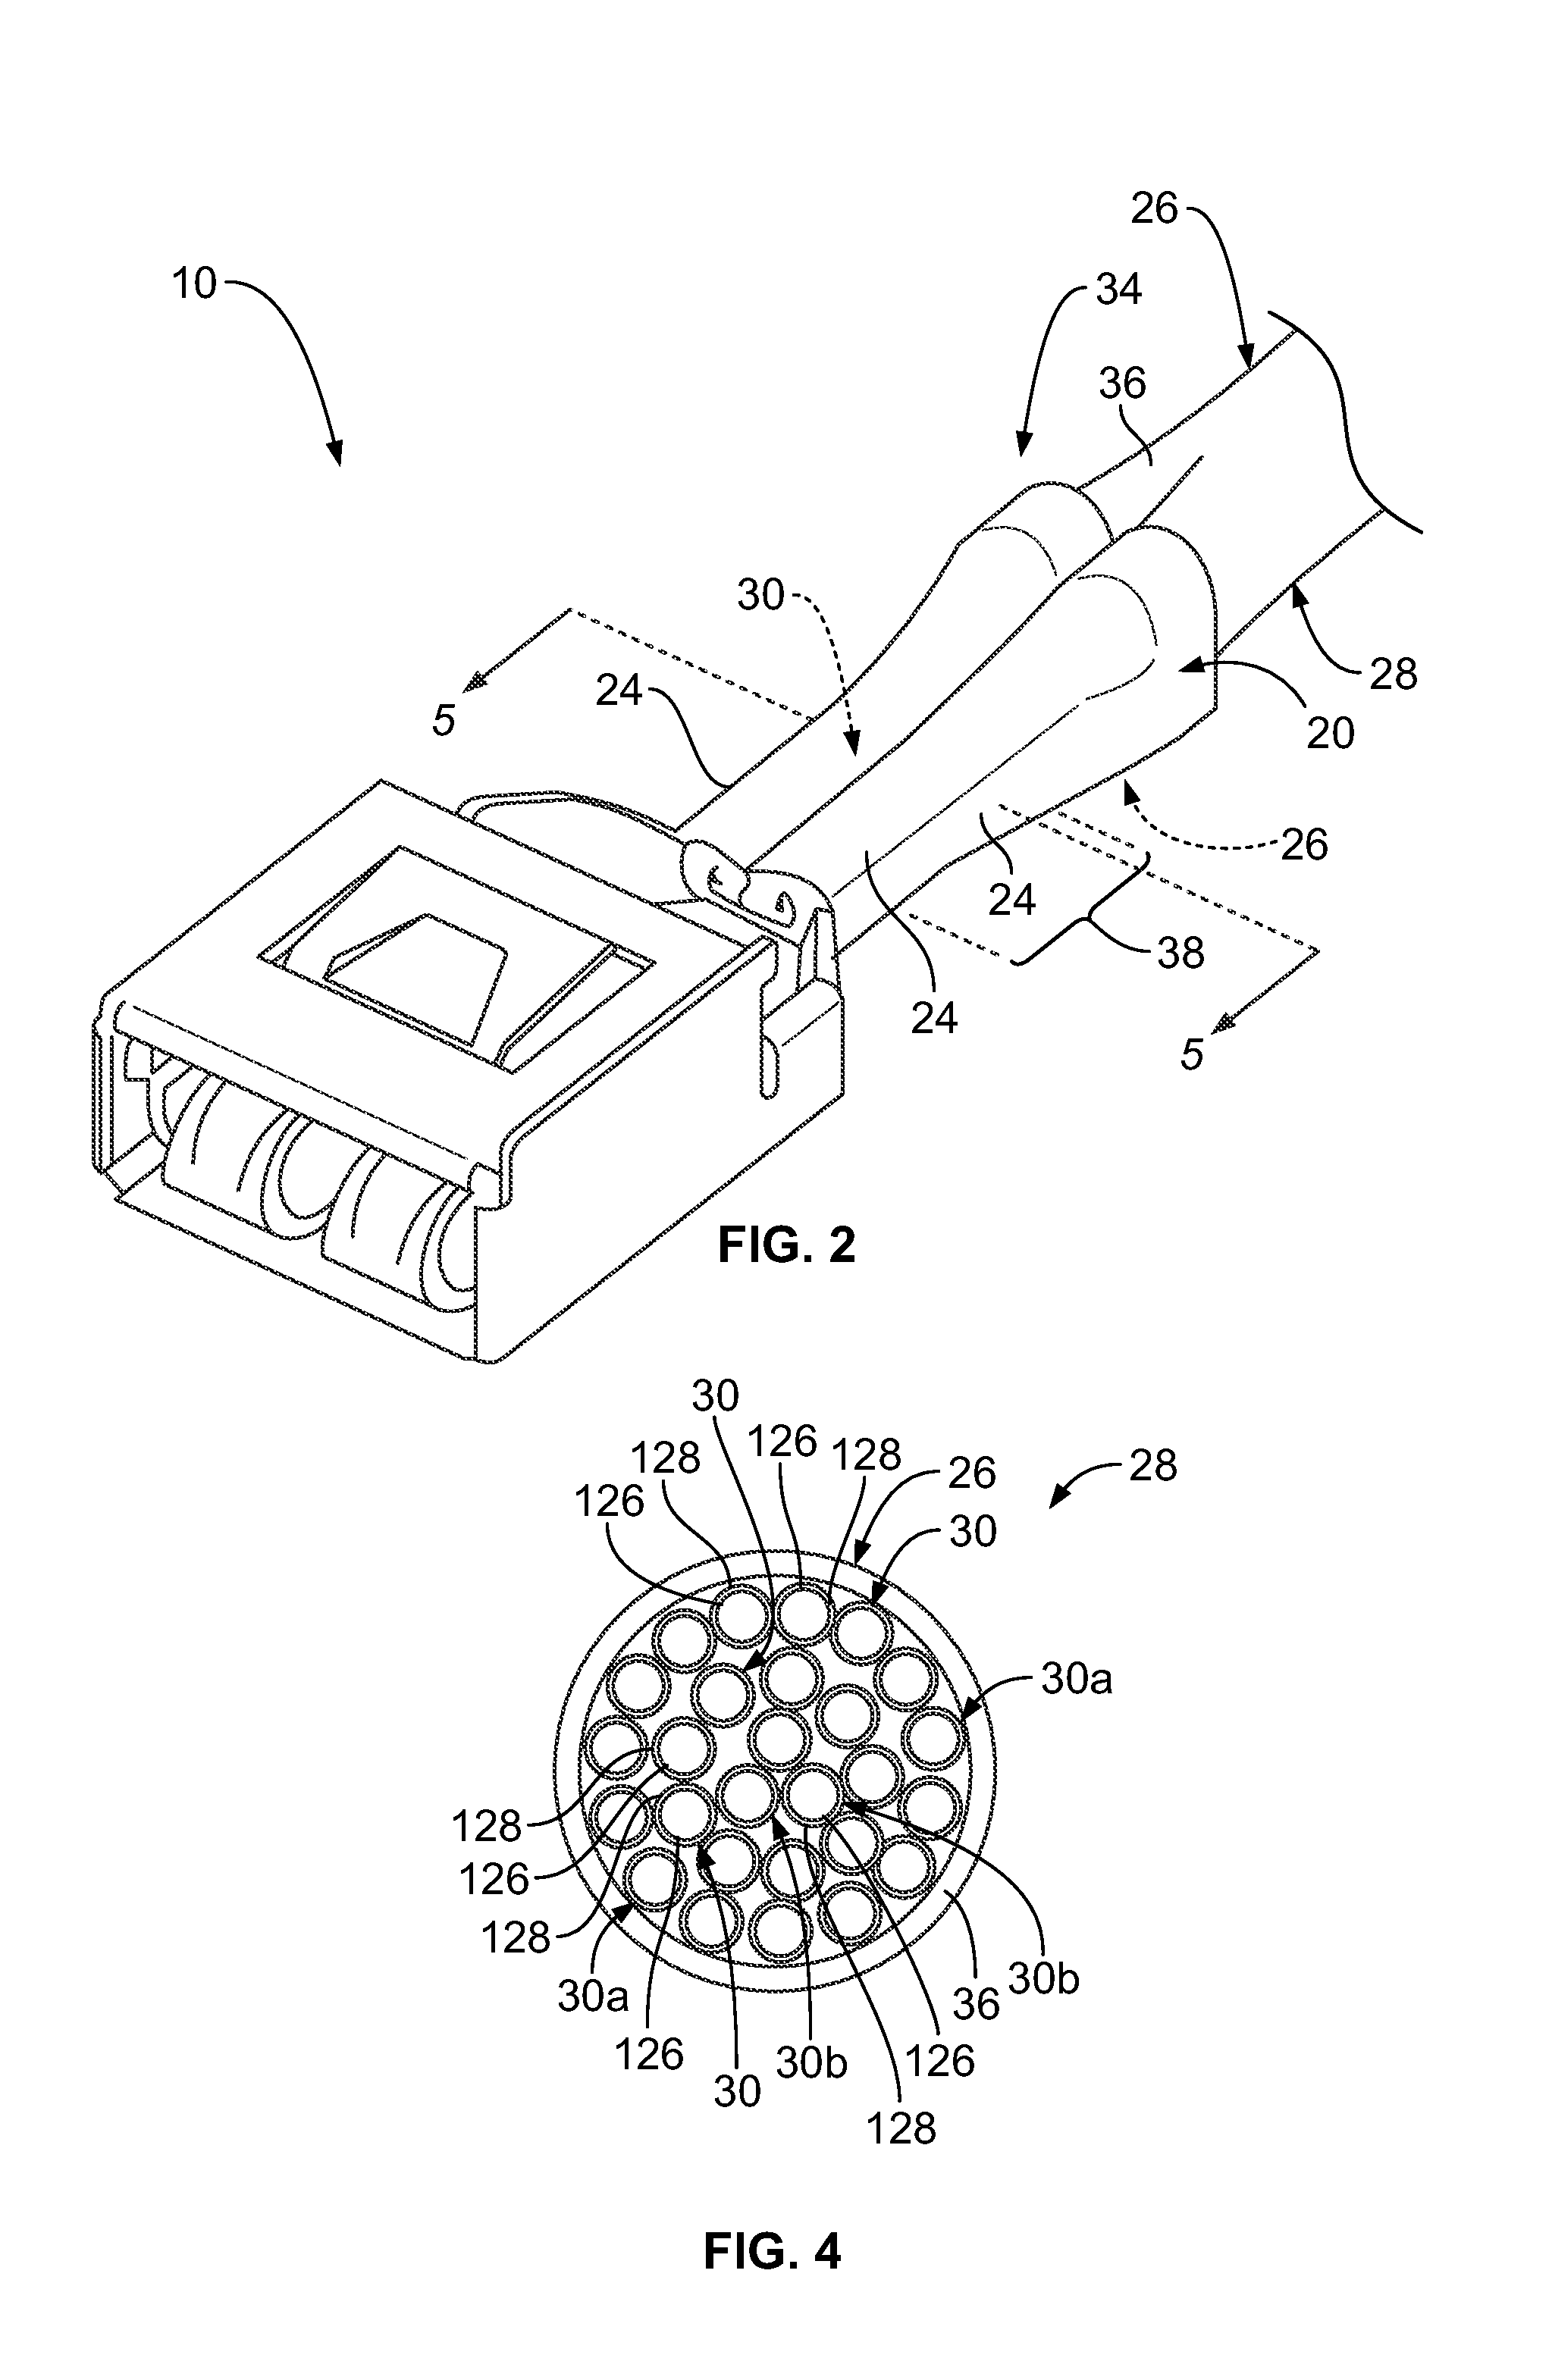 Method and apparatus for crimping an electrical terminal to an electrical wire